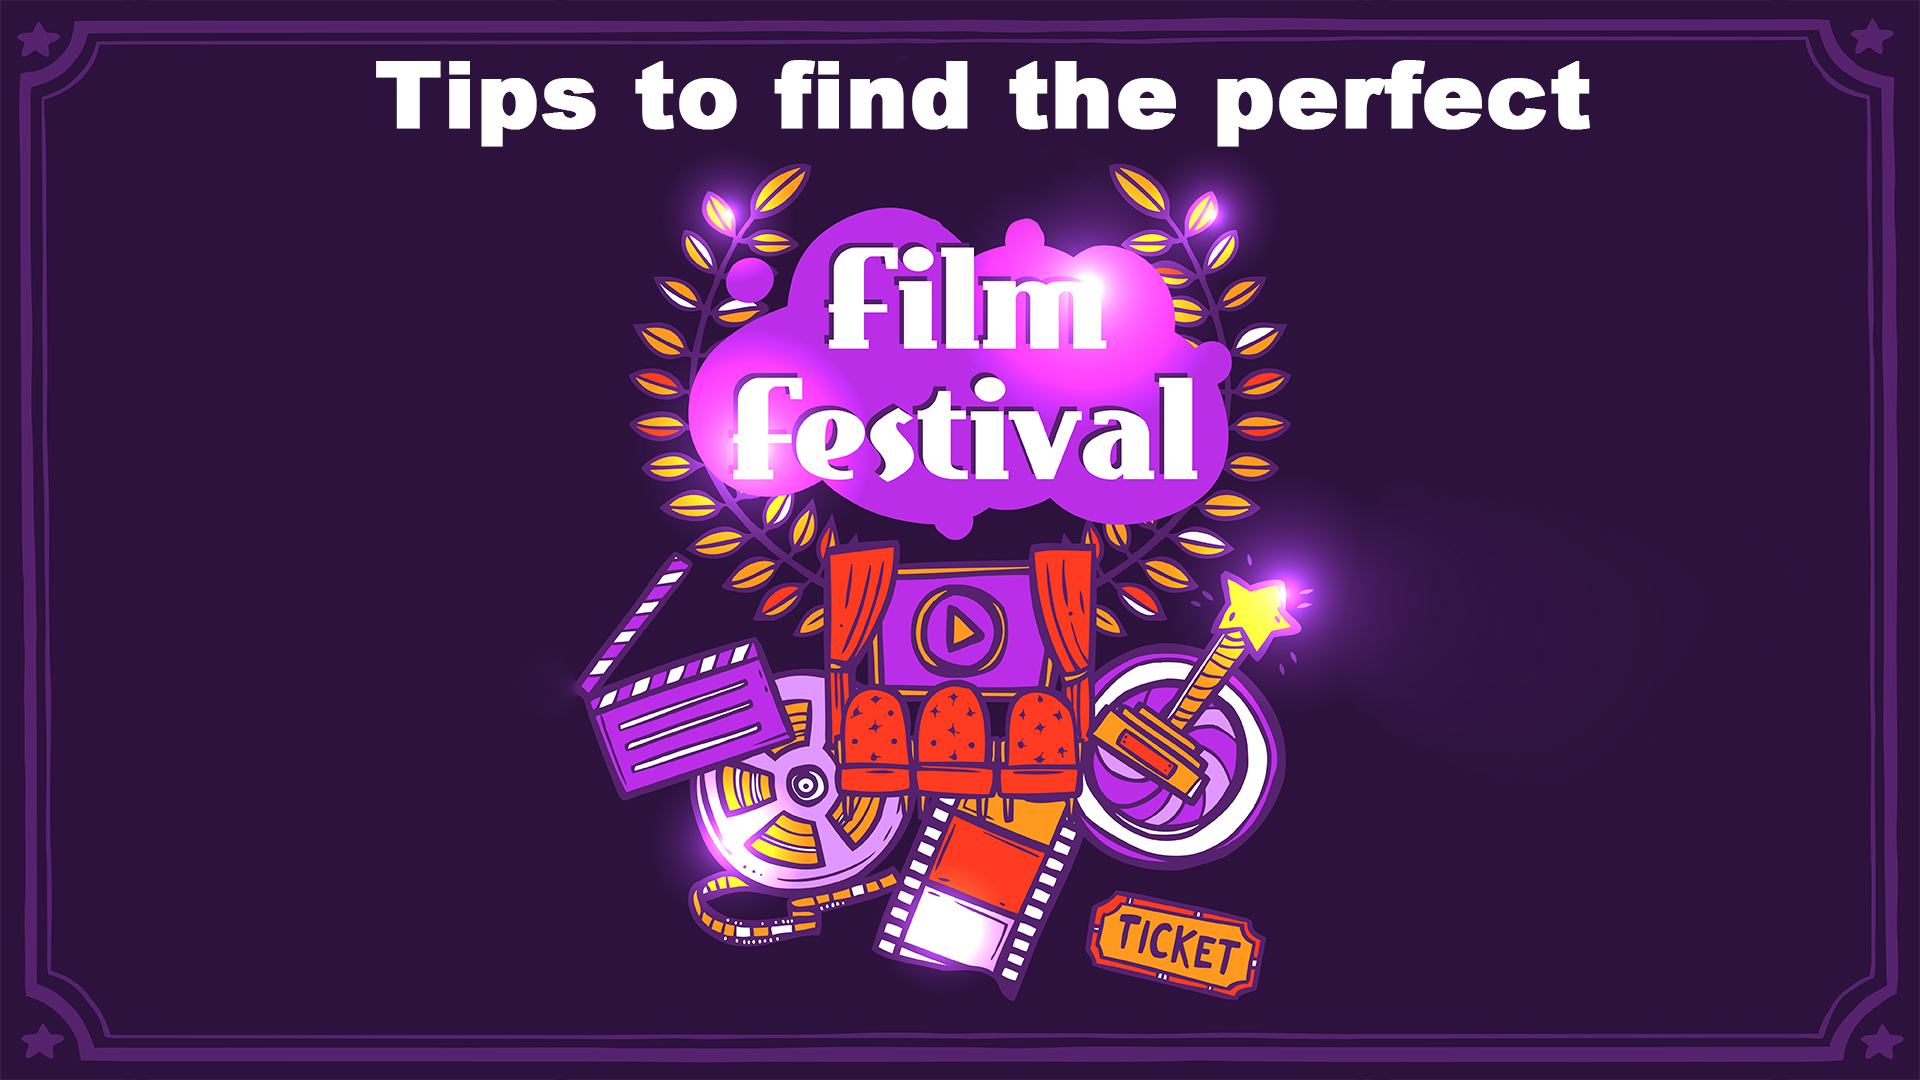 How can you find the perfect Film Festival?